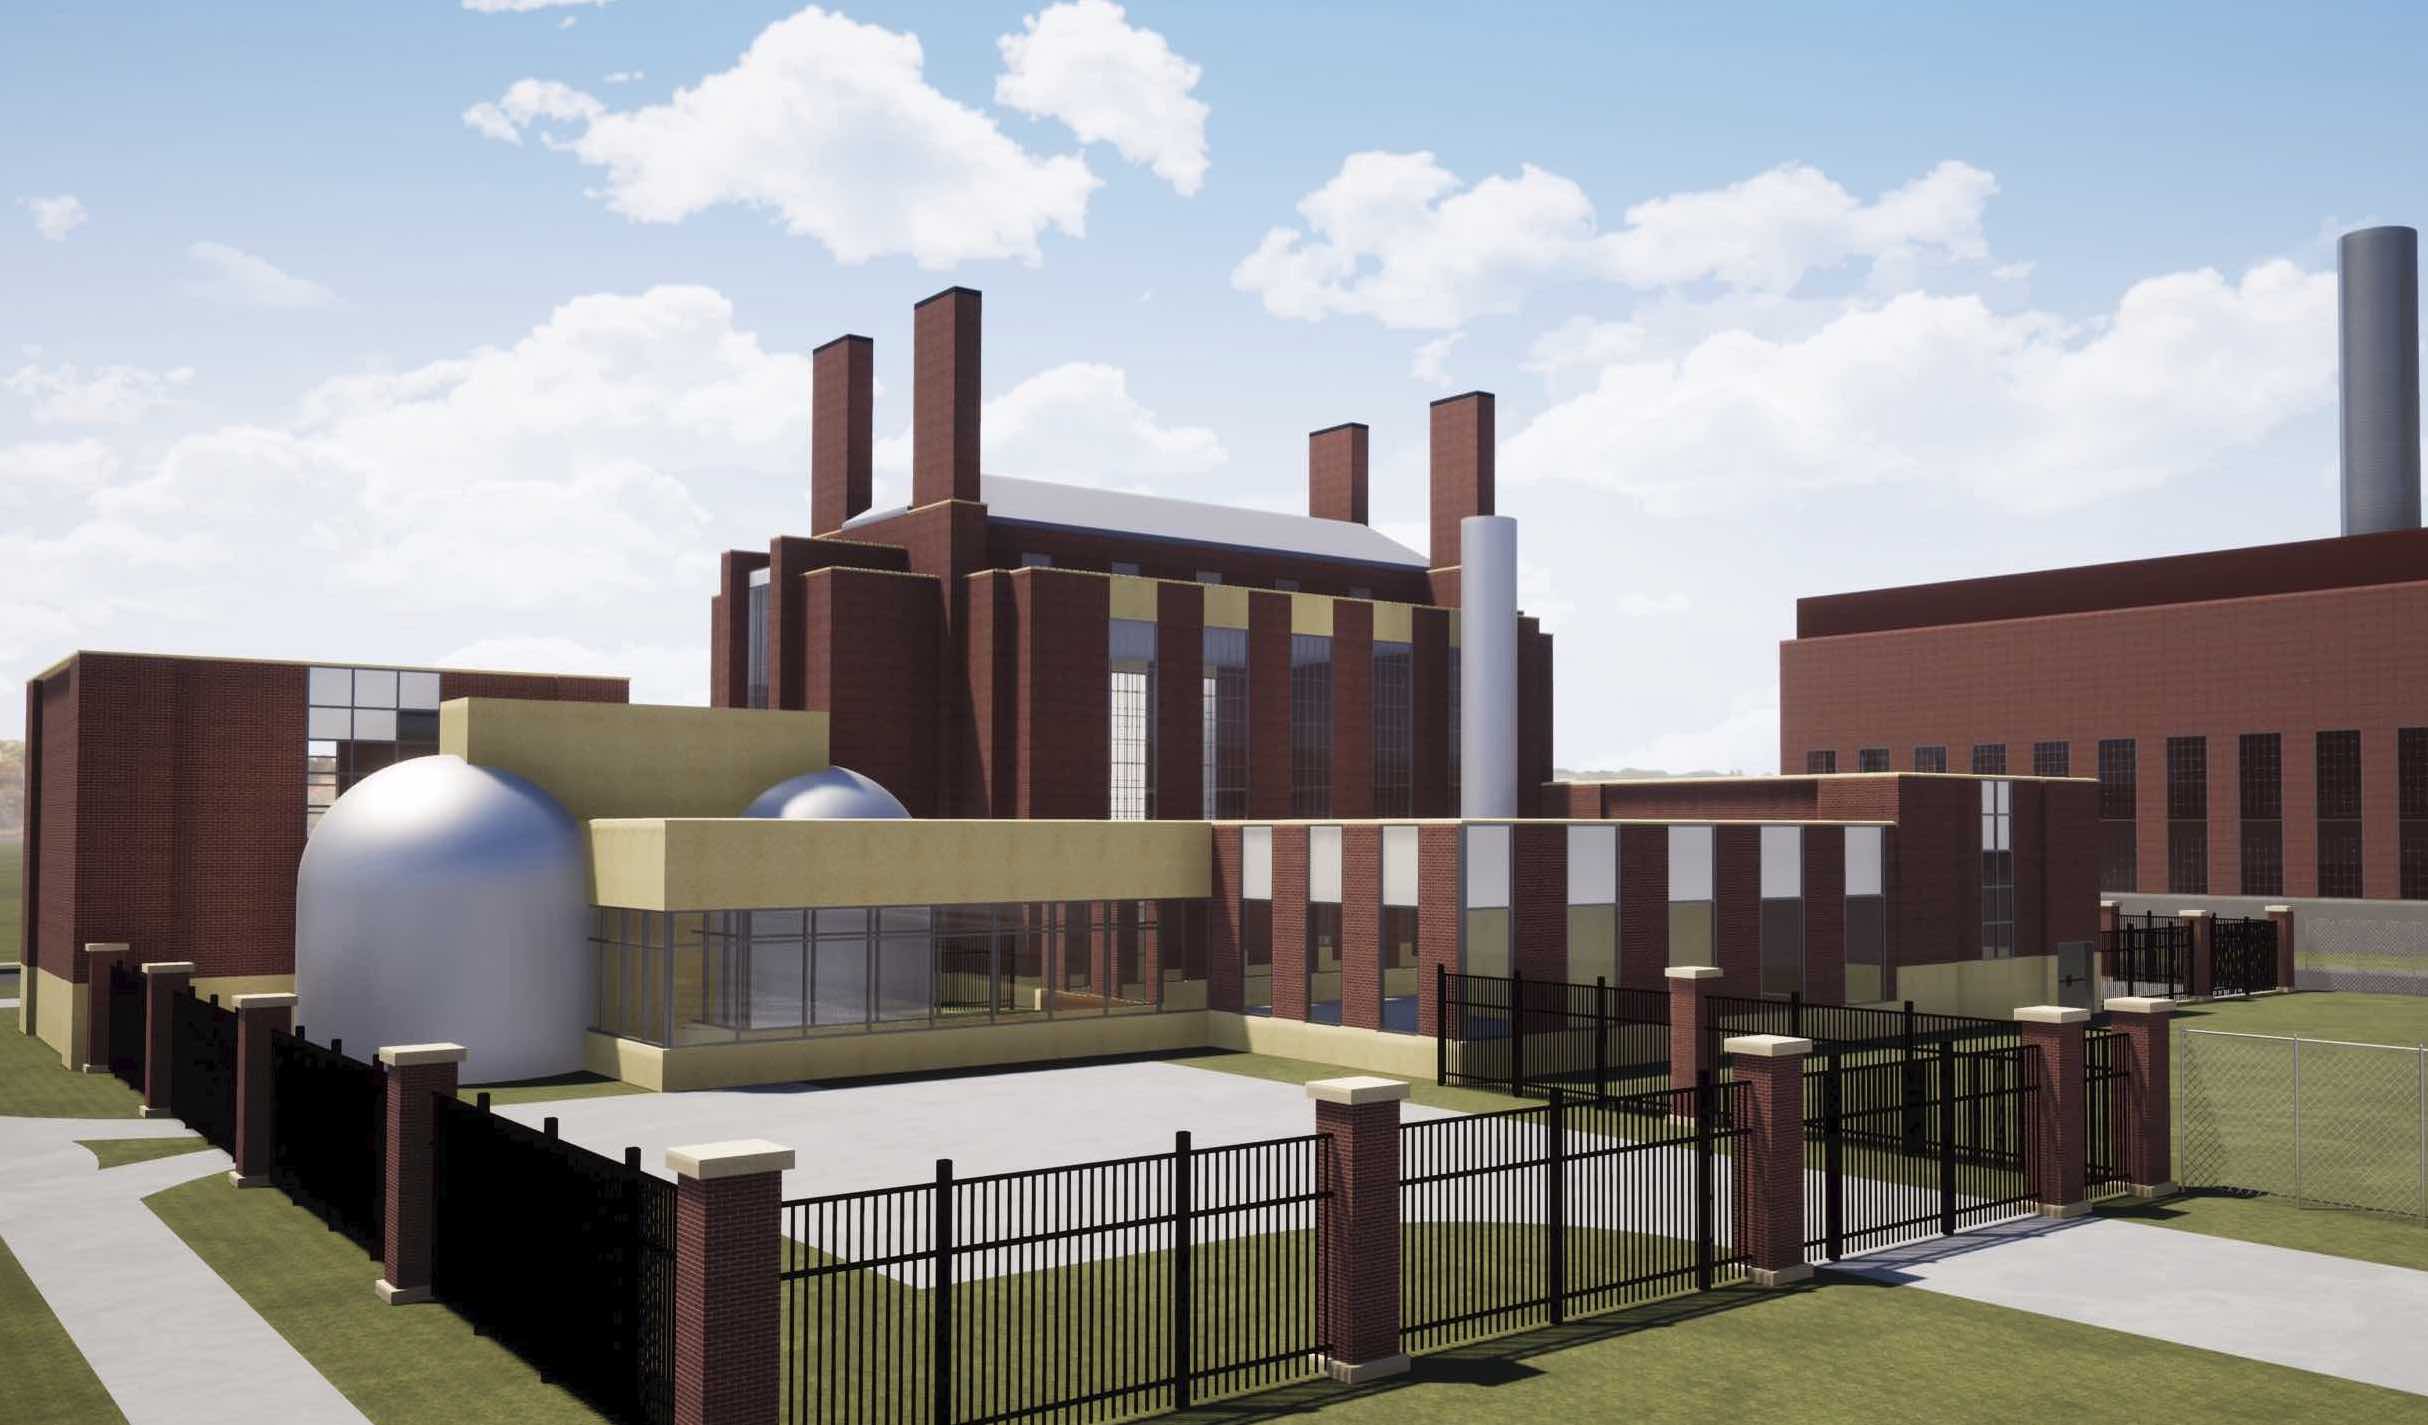 University of Illinois and Ultra Safe Nuclear Corporation
Propose First Gen IV Research Reactor at a U.S. University